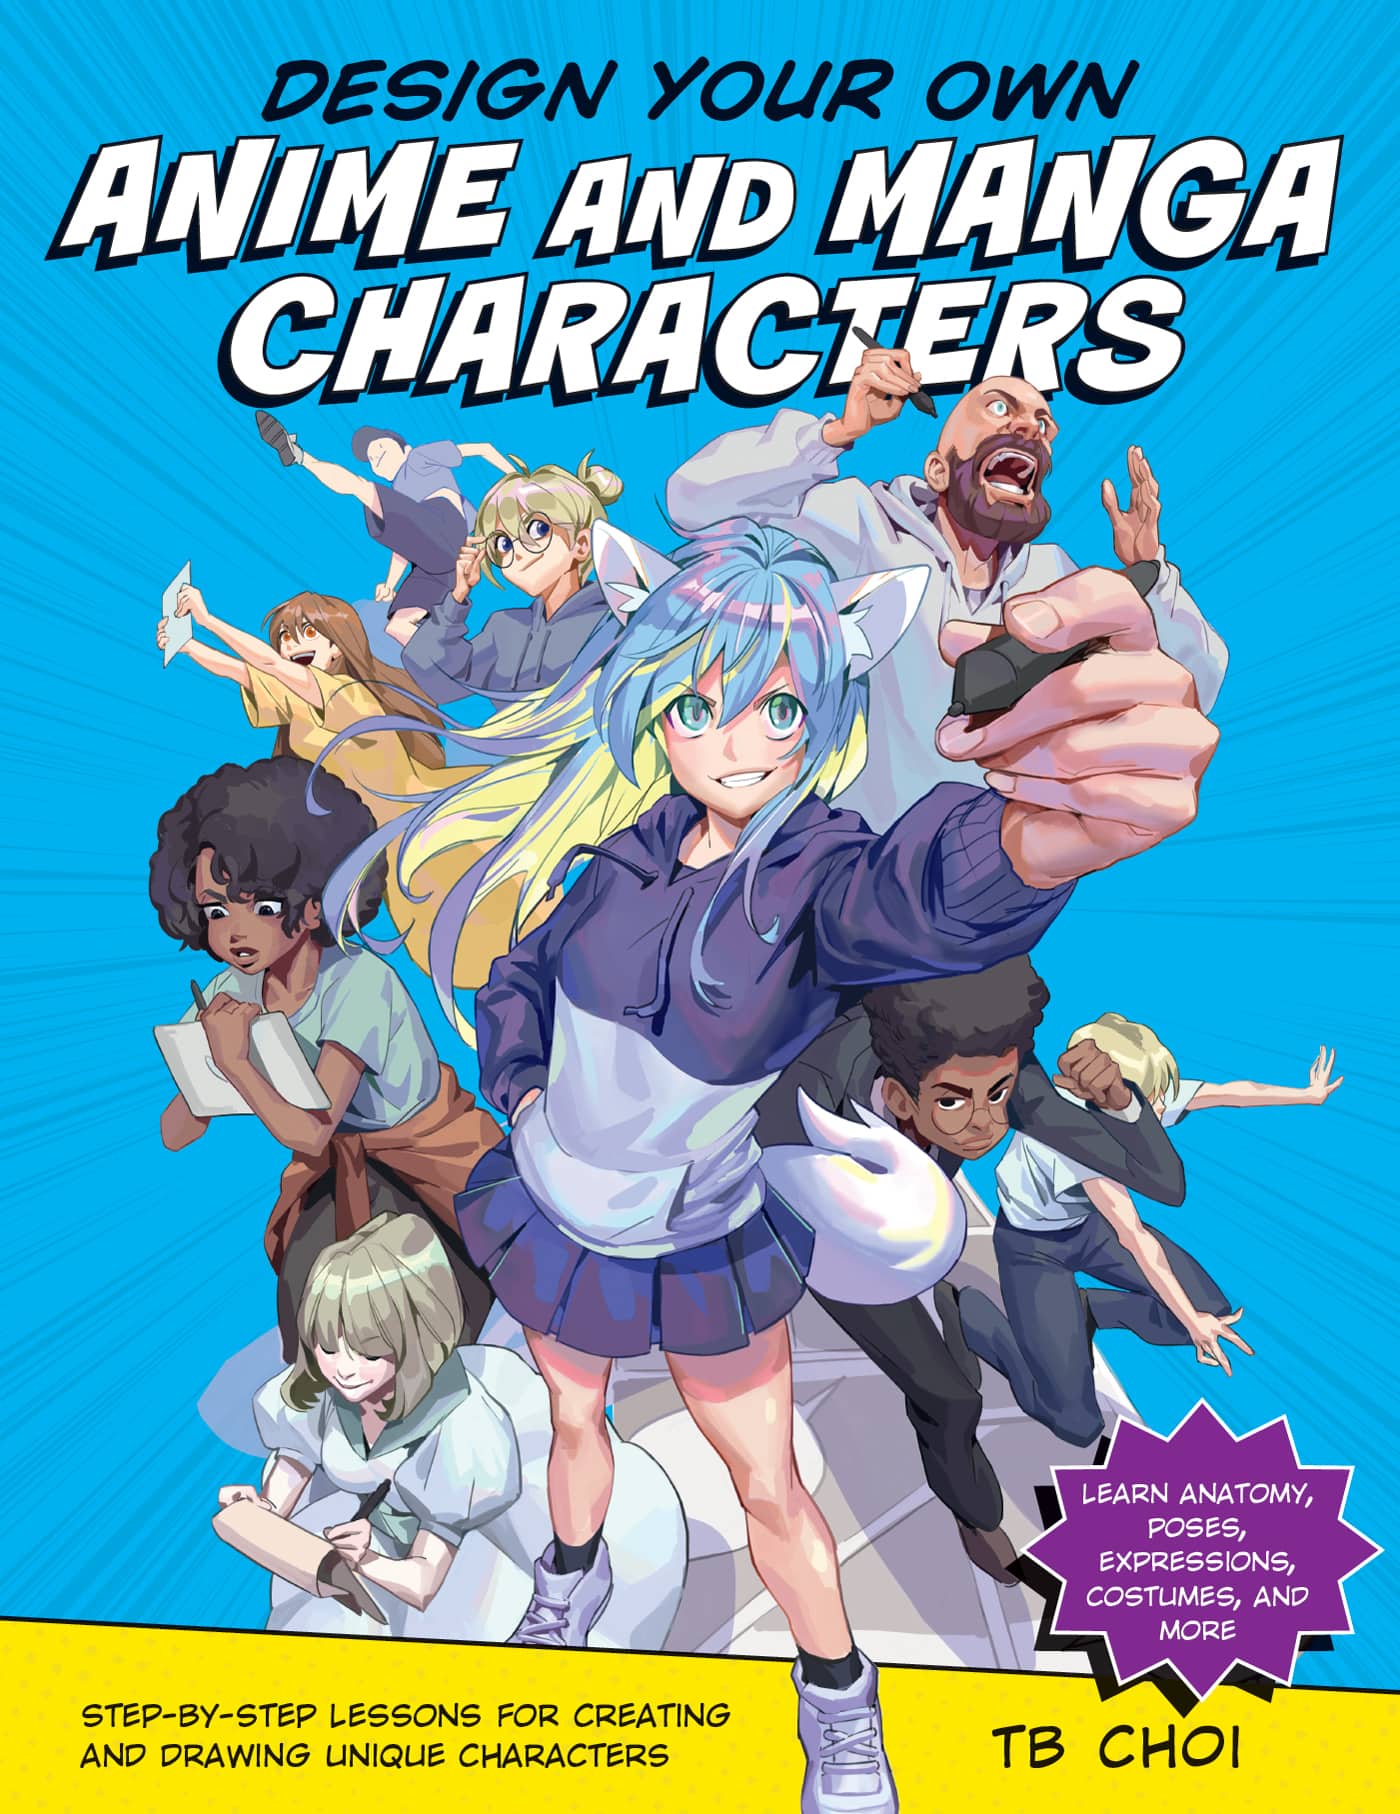 Design Your Own Anime and Manga Characters: Step-by-Step Lessons for Creating and Drawing Unique Characters